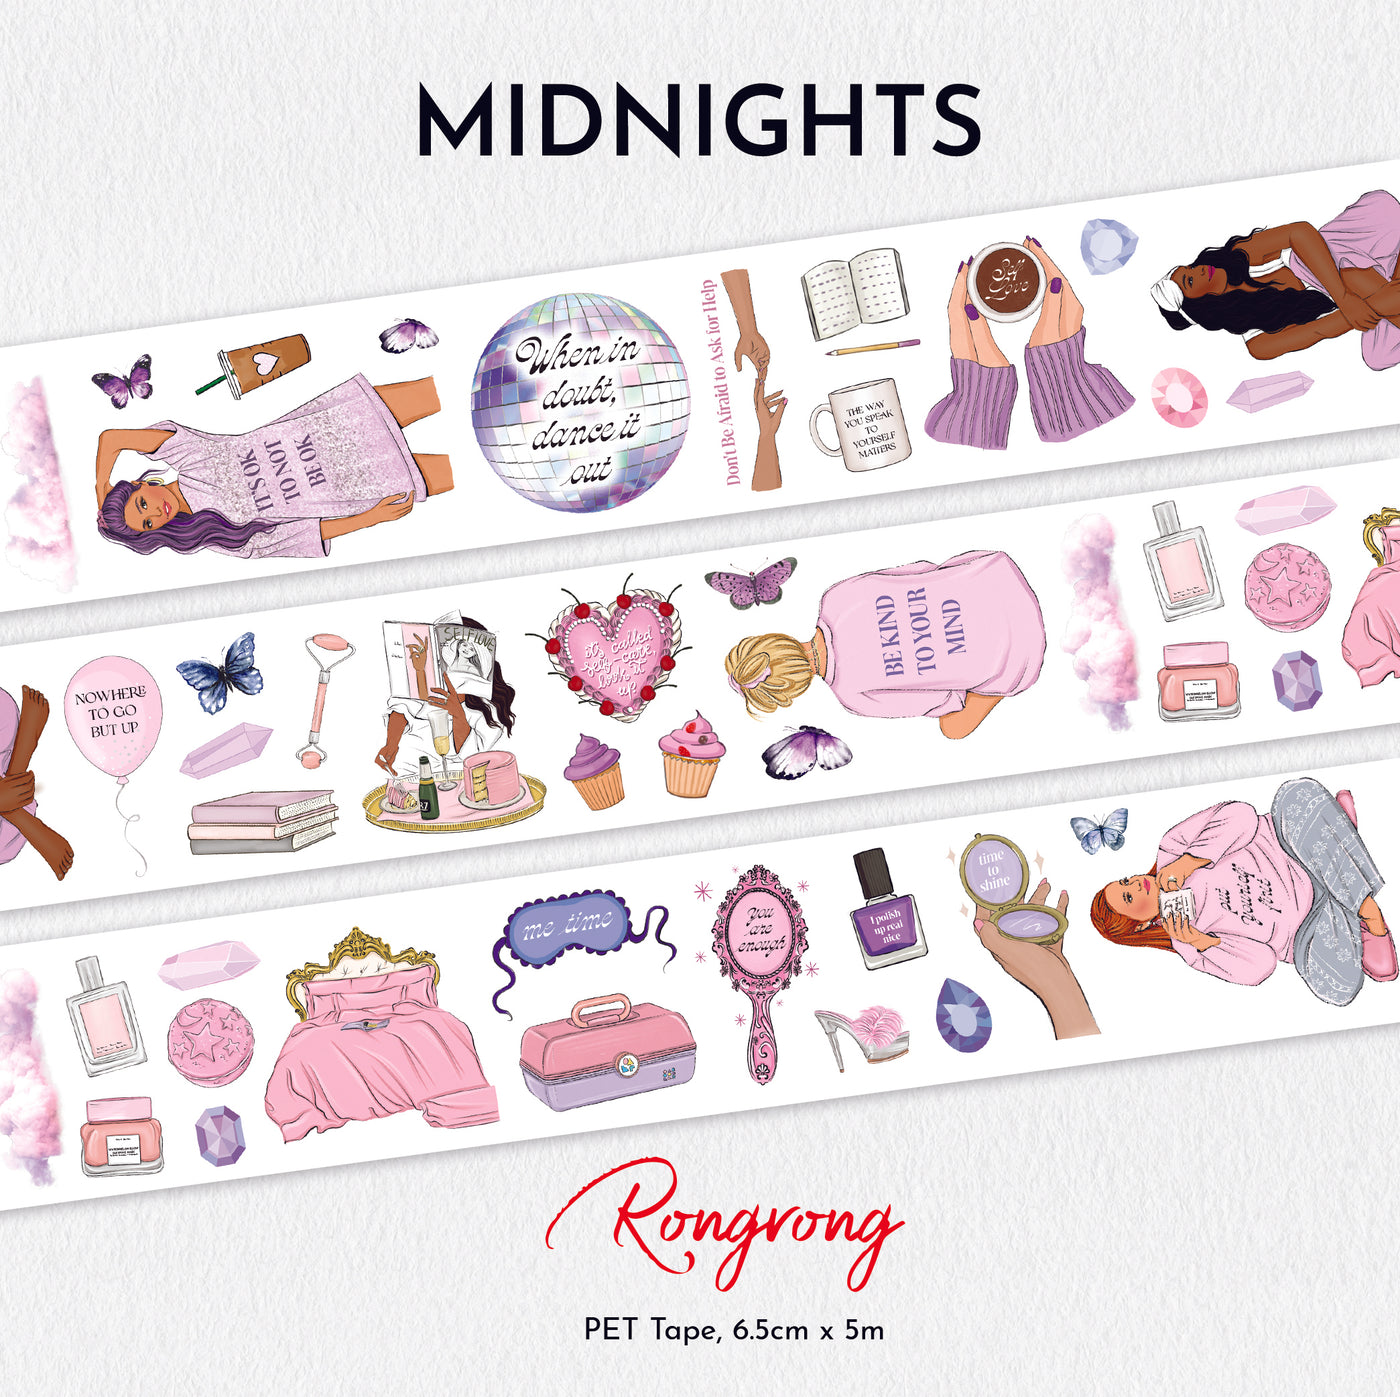 Shop Rongrong Midnight PET Tape for Mental Health